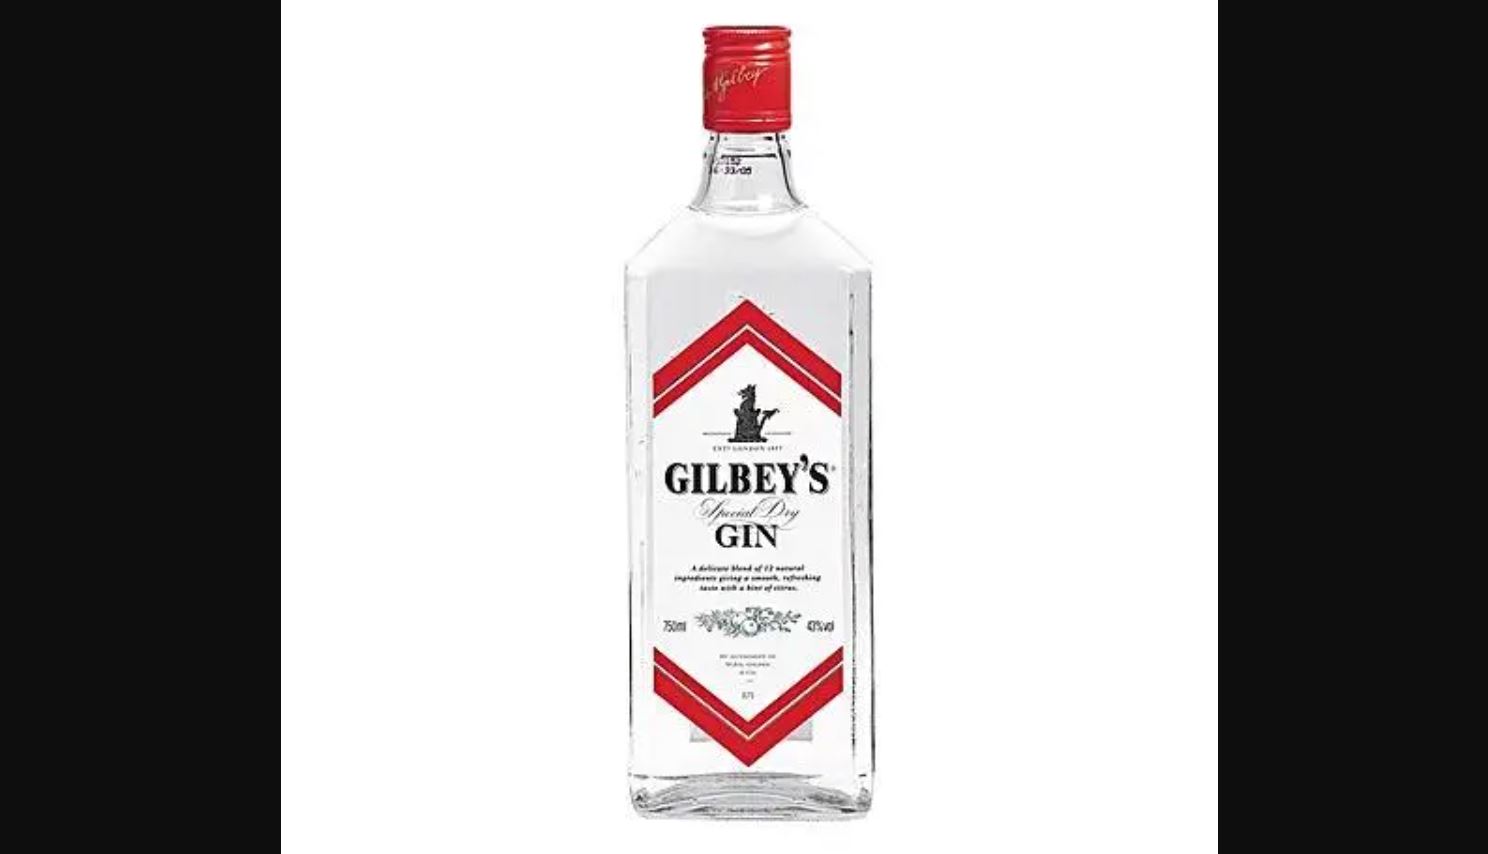 Gilbey’s London Dry Gin